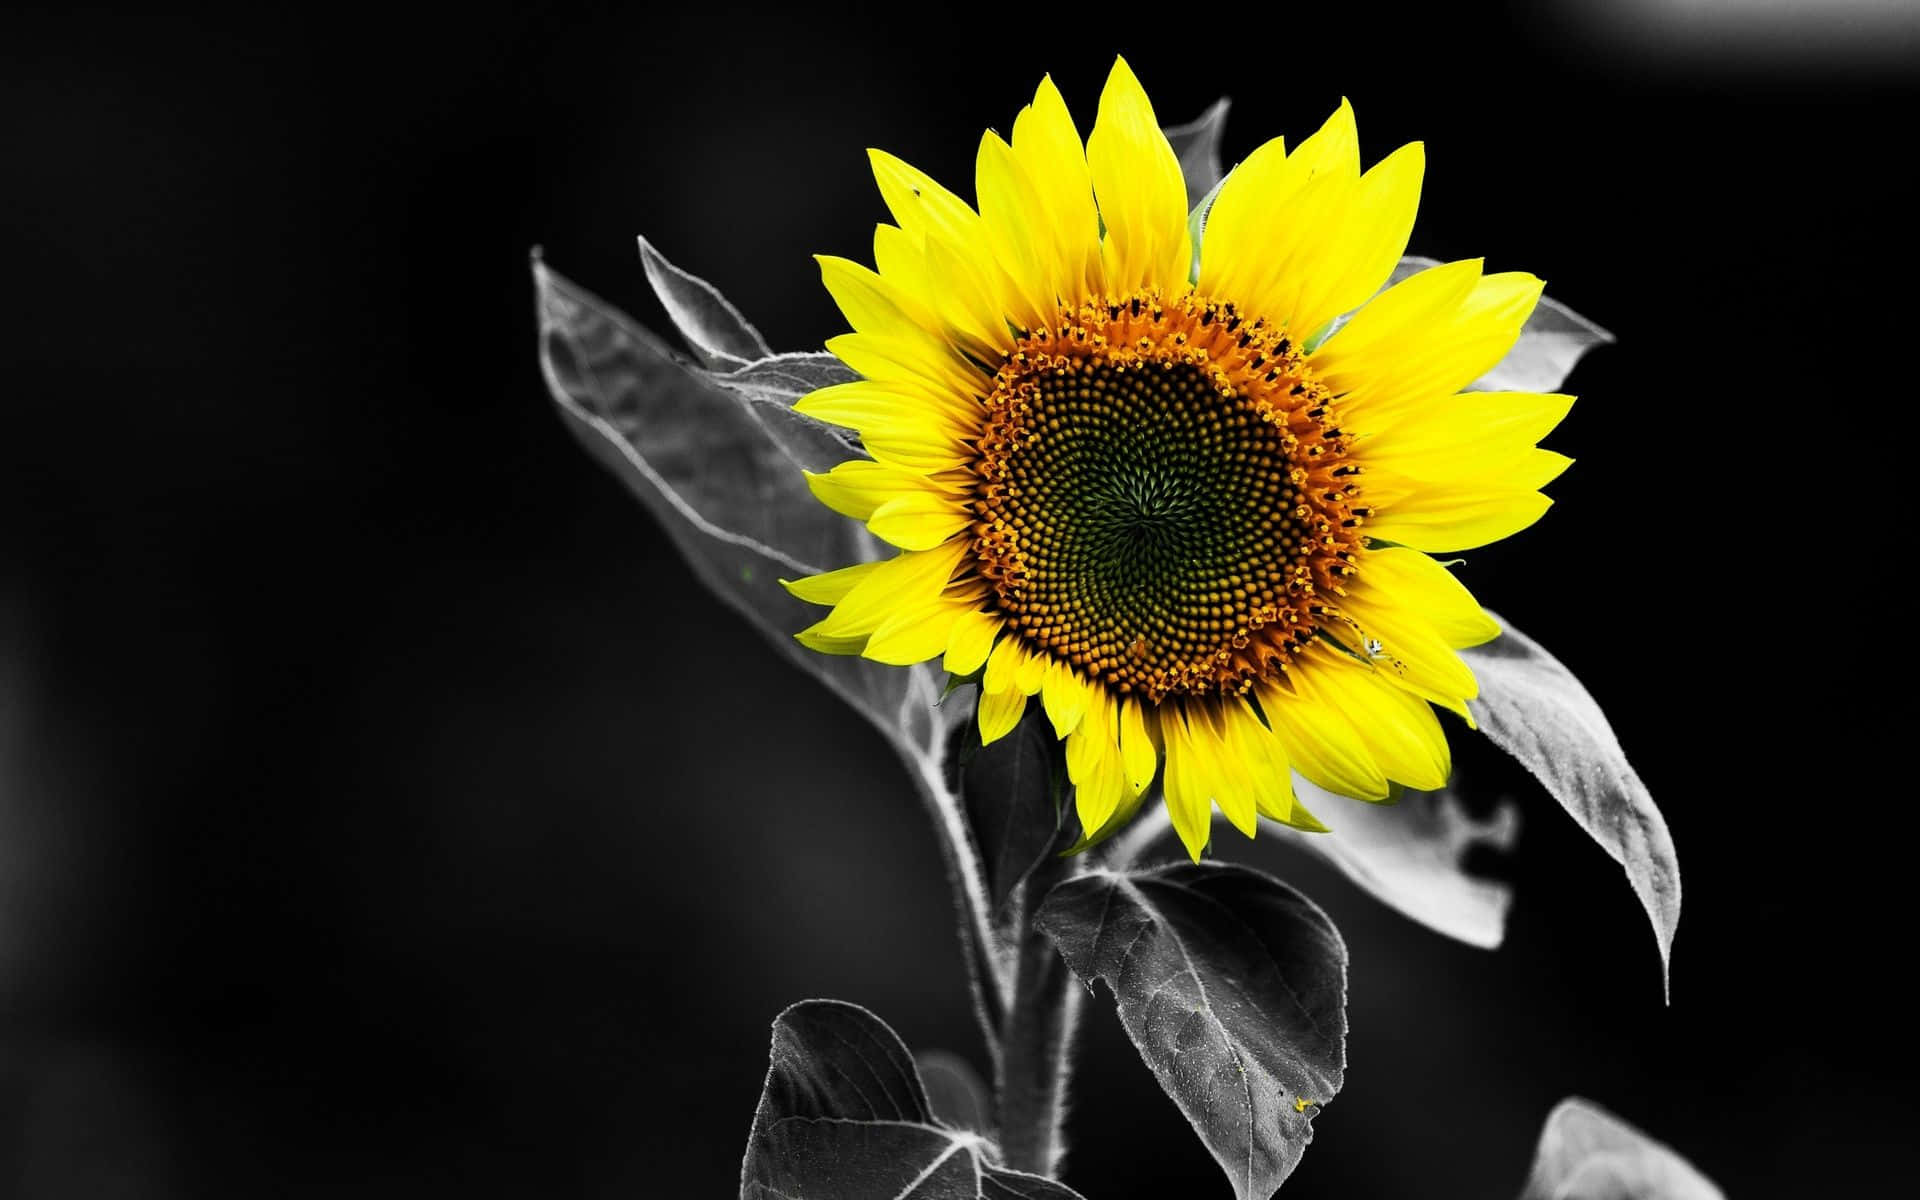 38 Sunflower iPhone Wallpapers to Download for Free - atinydreamer